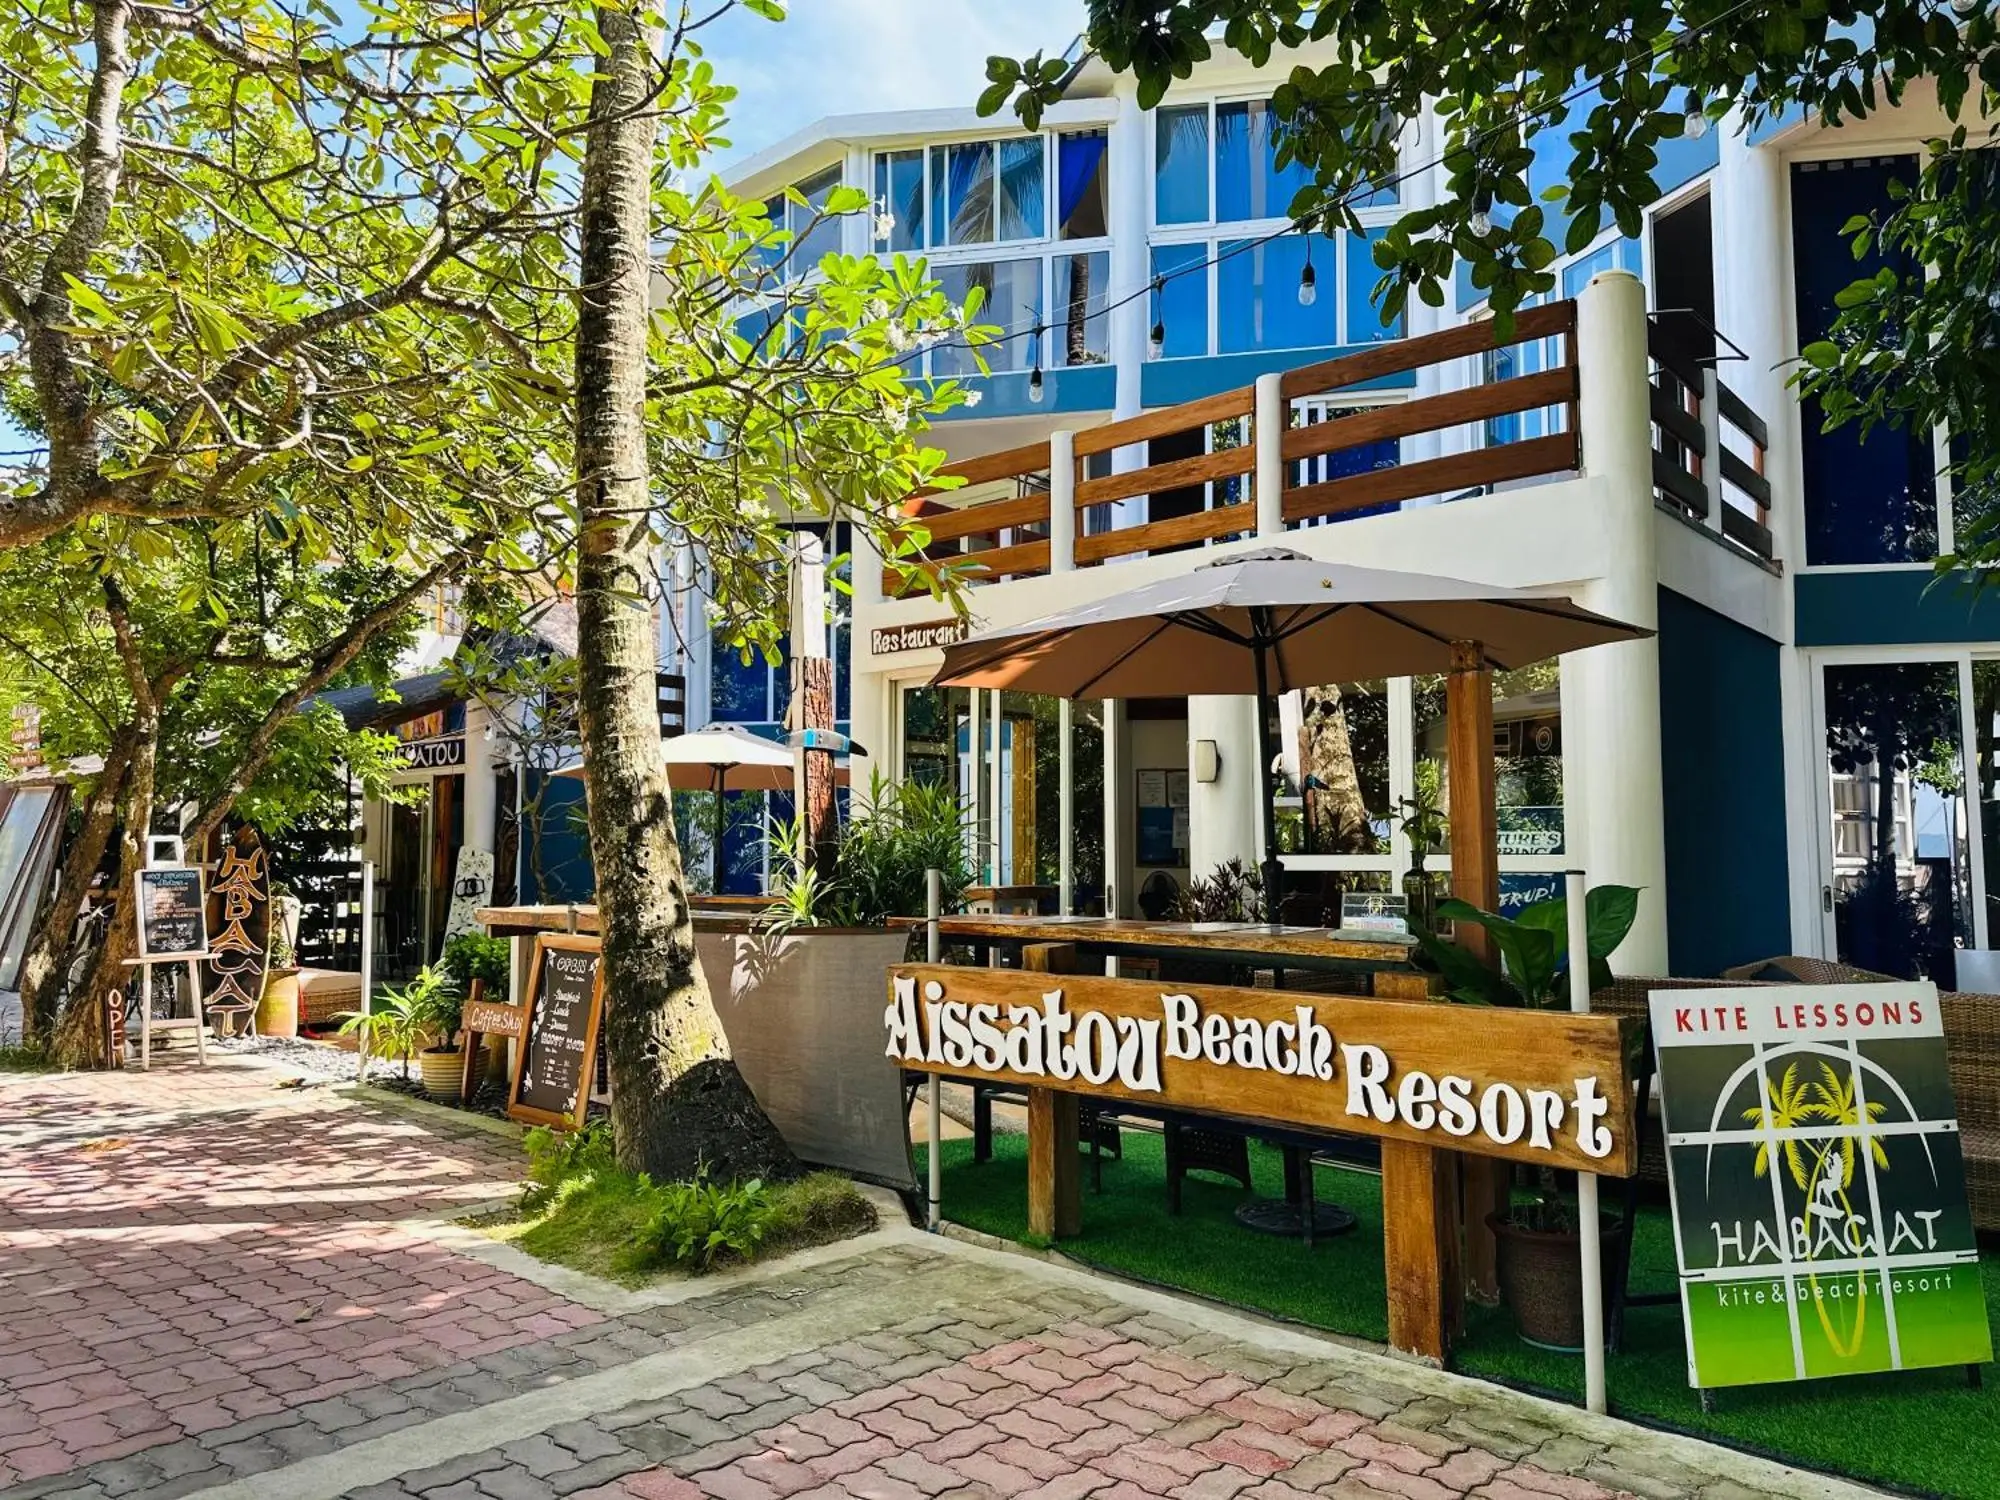 Front view of Aissatou Beach Resort in Boracay, displaying its charming exterior with a blend of modern and traditional design, wooden signboards for the resort and adjacent amenities, surrounded by lush greenery.